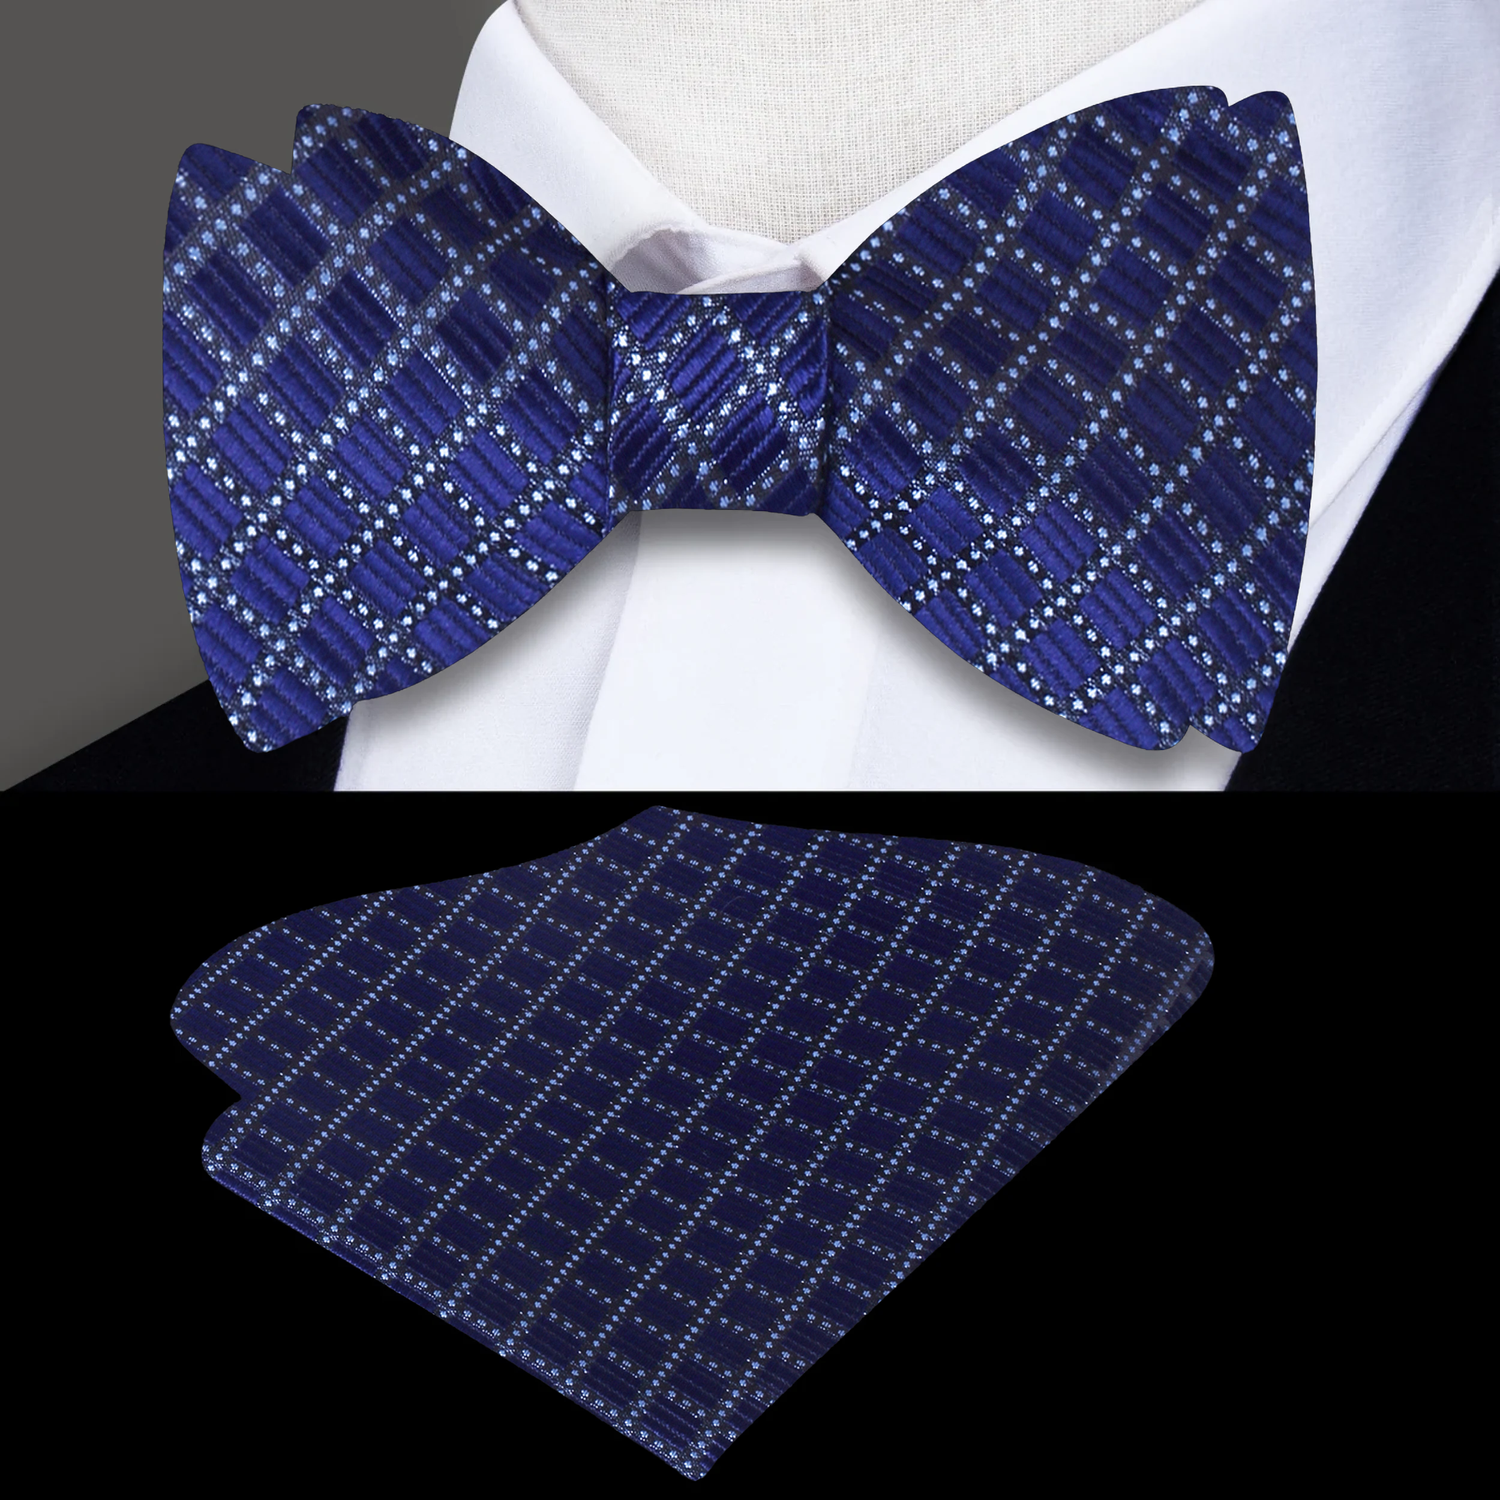 A Blue Small Geometric Check Pattern Silk Self Tie Bow Tie, Matching Pocket Square